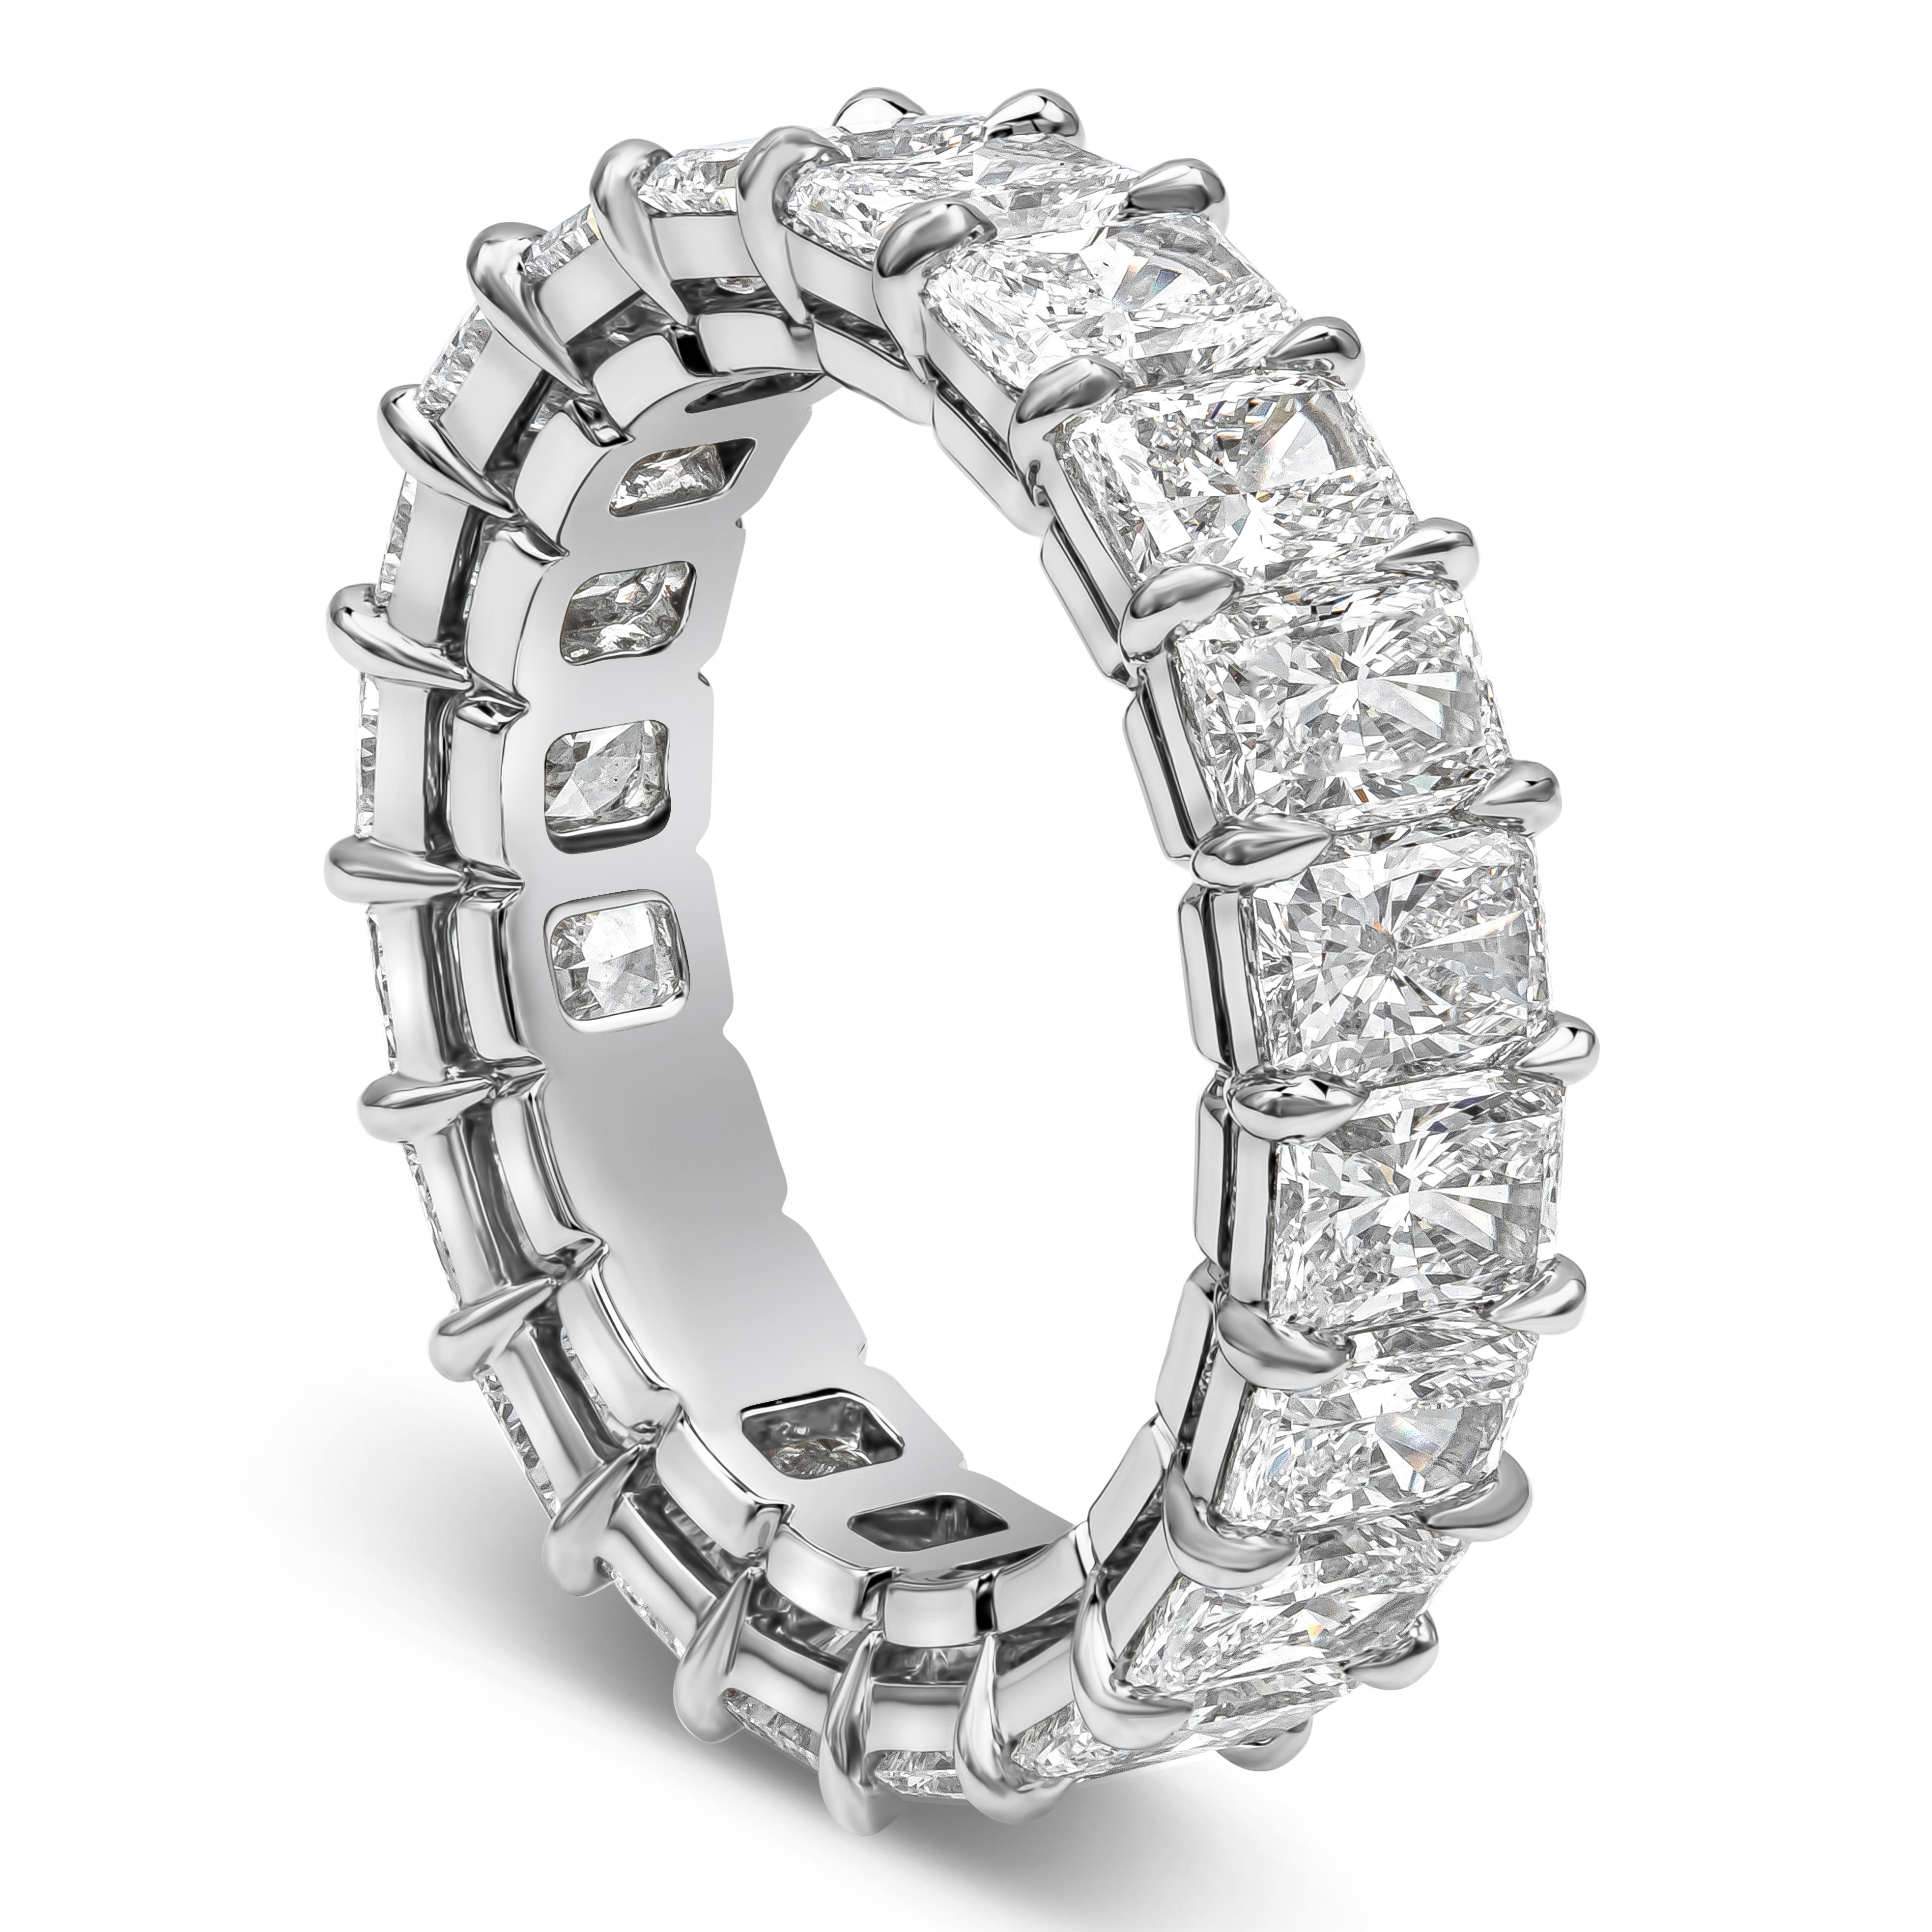 A classic eternity wedding band style showcasing a row of radiant cut diamonds weighing 6.36 carats total, D-E Color and VS+ in Clarity, set in a timeless shared prong setting. Made with Platinum, Size 6.5 US and resizable upon request.

Roman